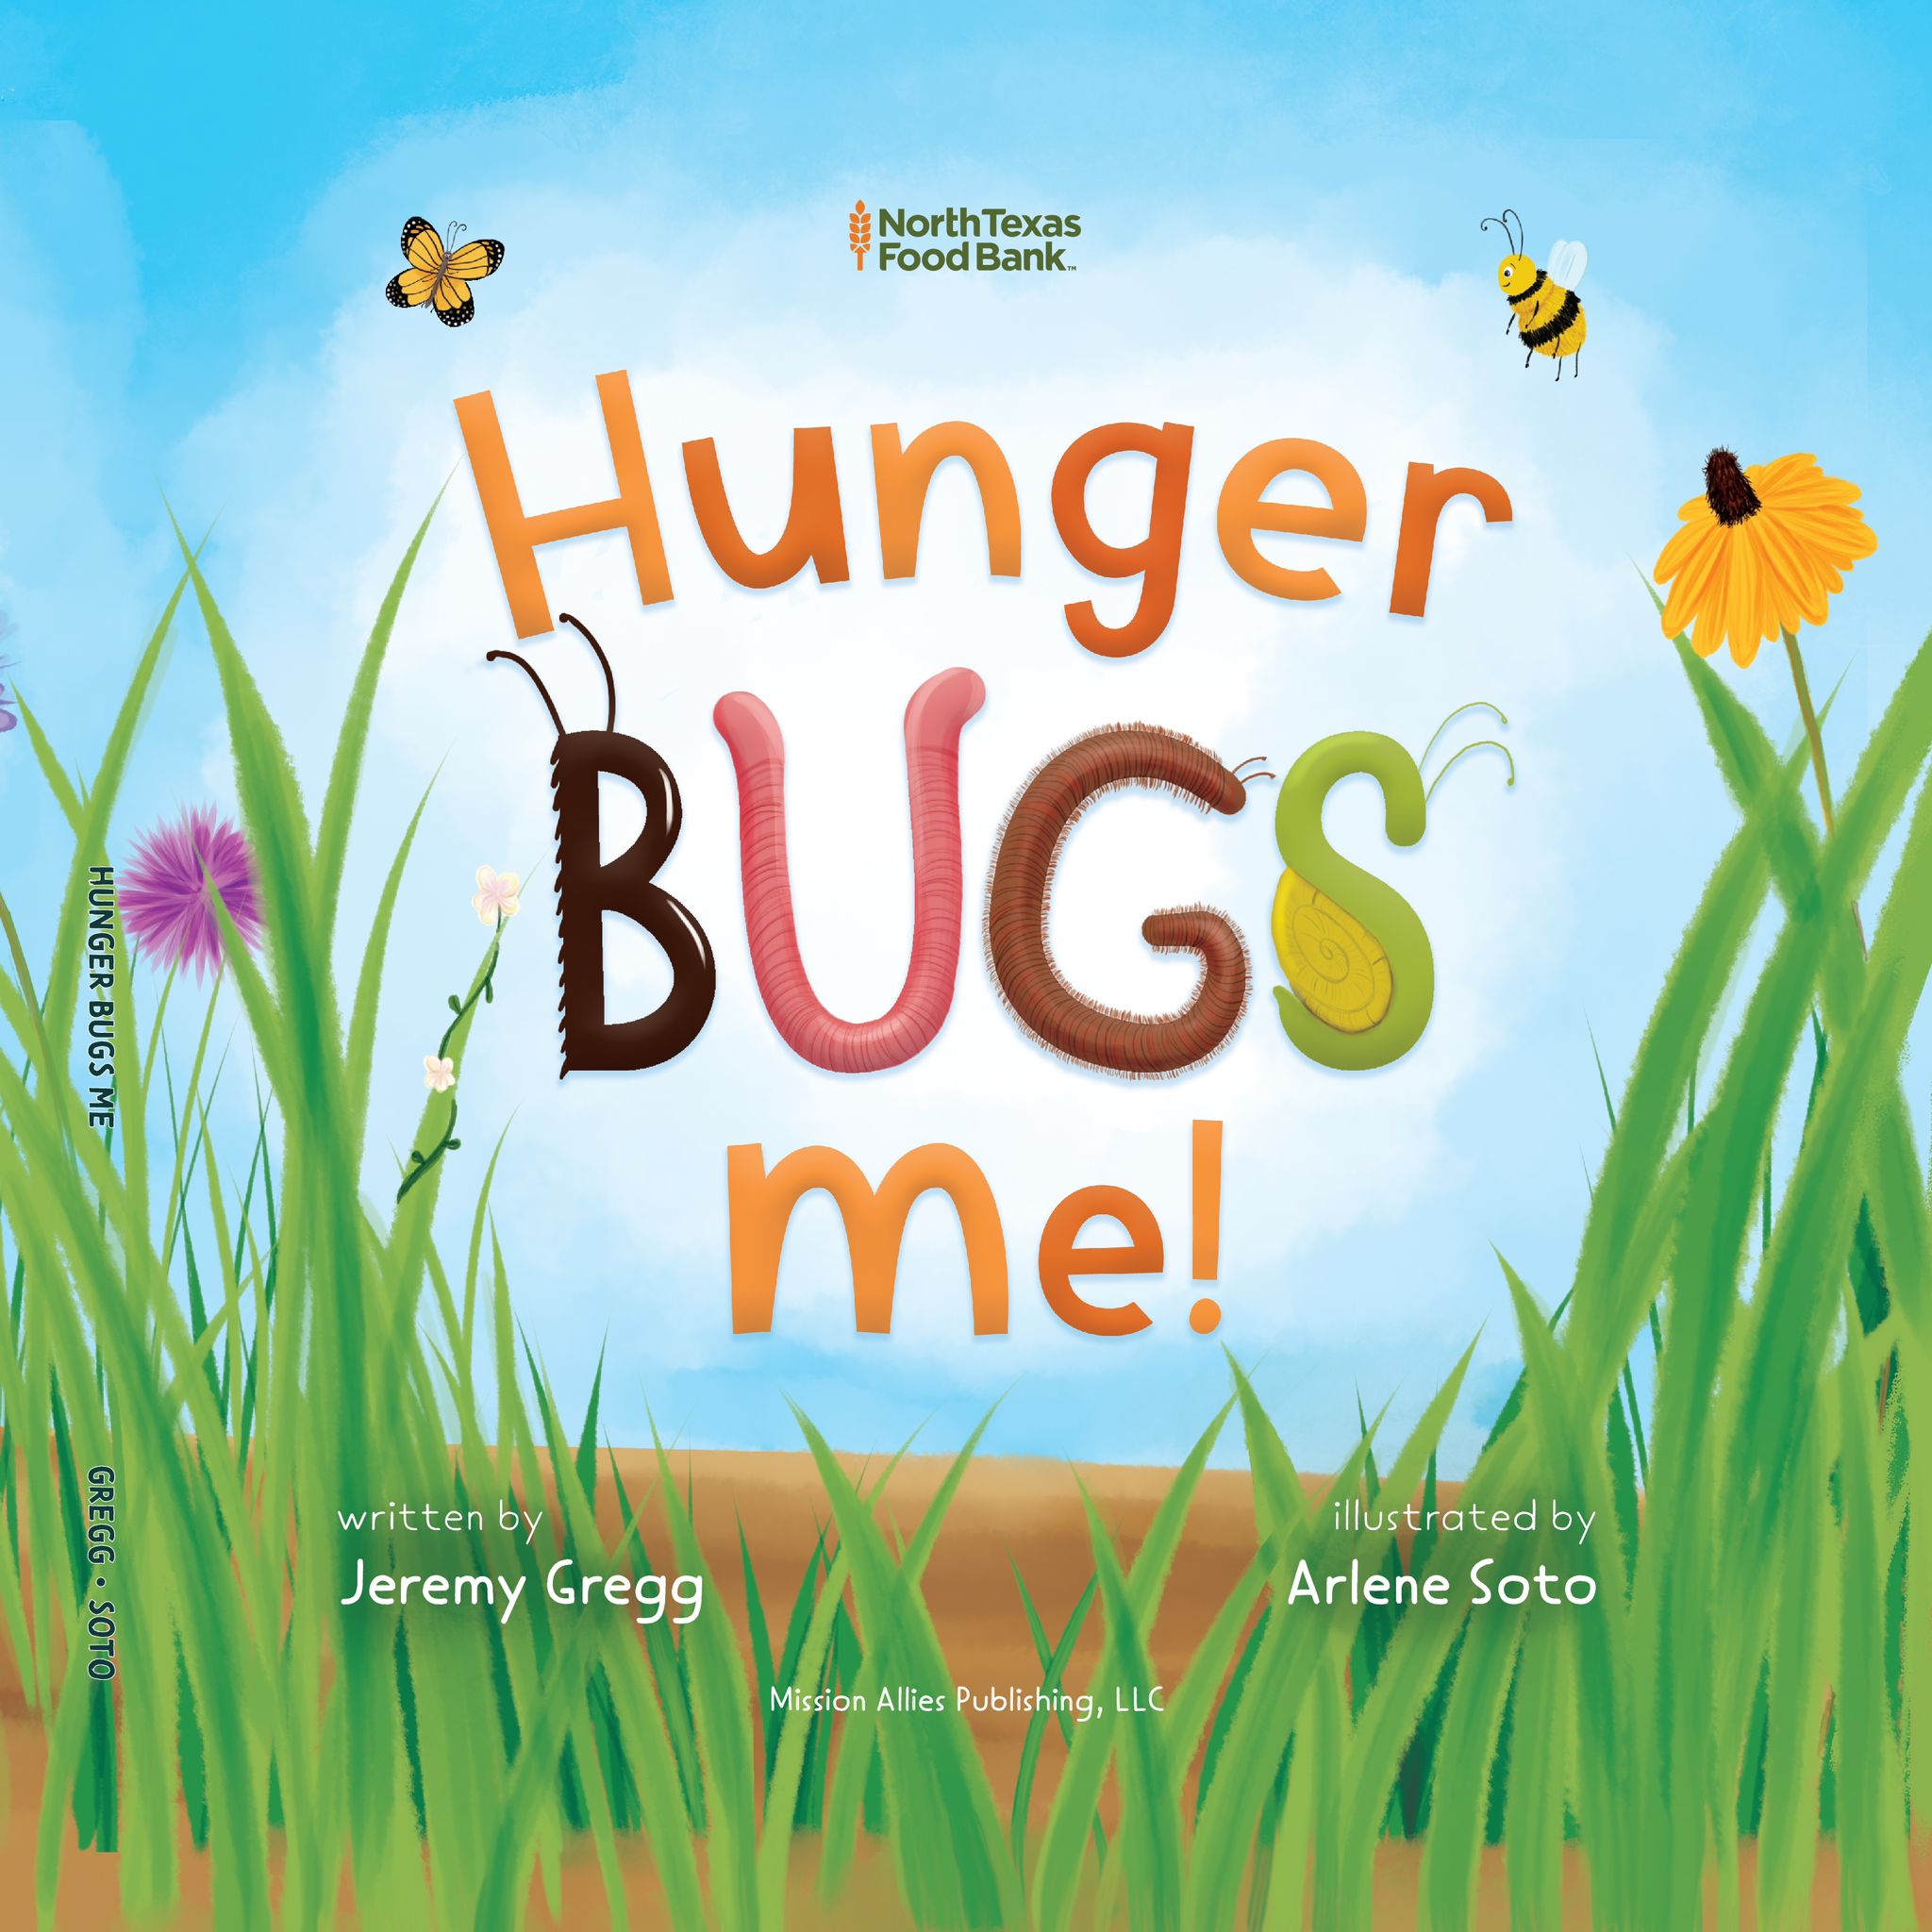 Hunger Bugs Me - a children's book about food insecurity, benefiting the North Texas Food Bank